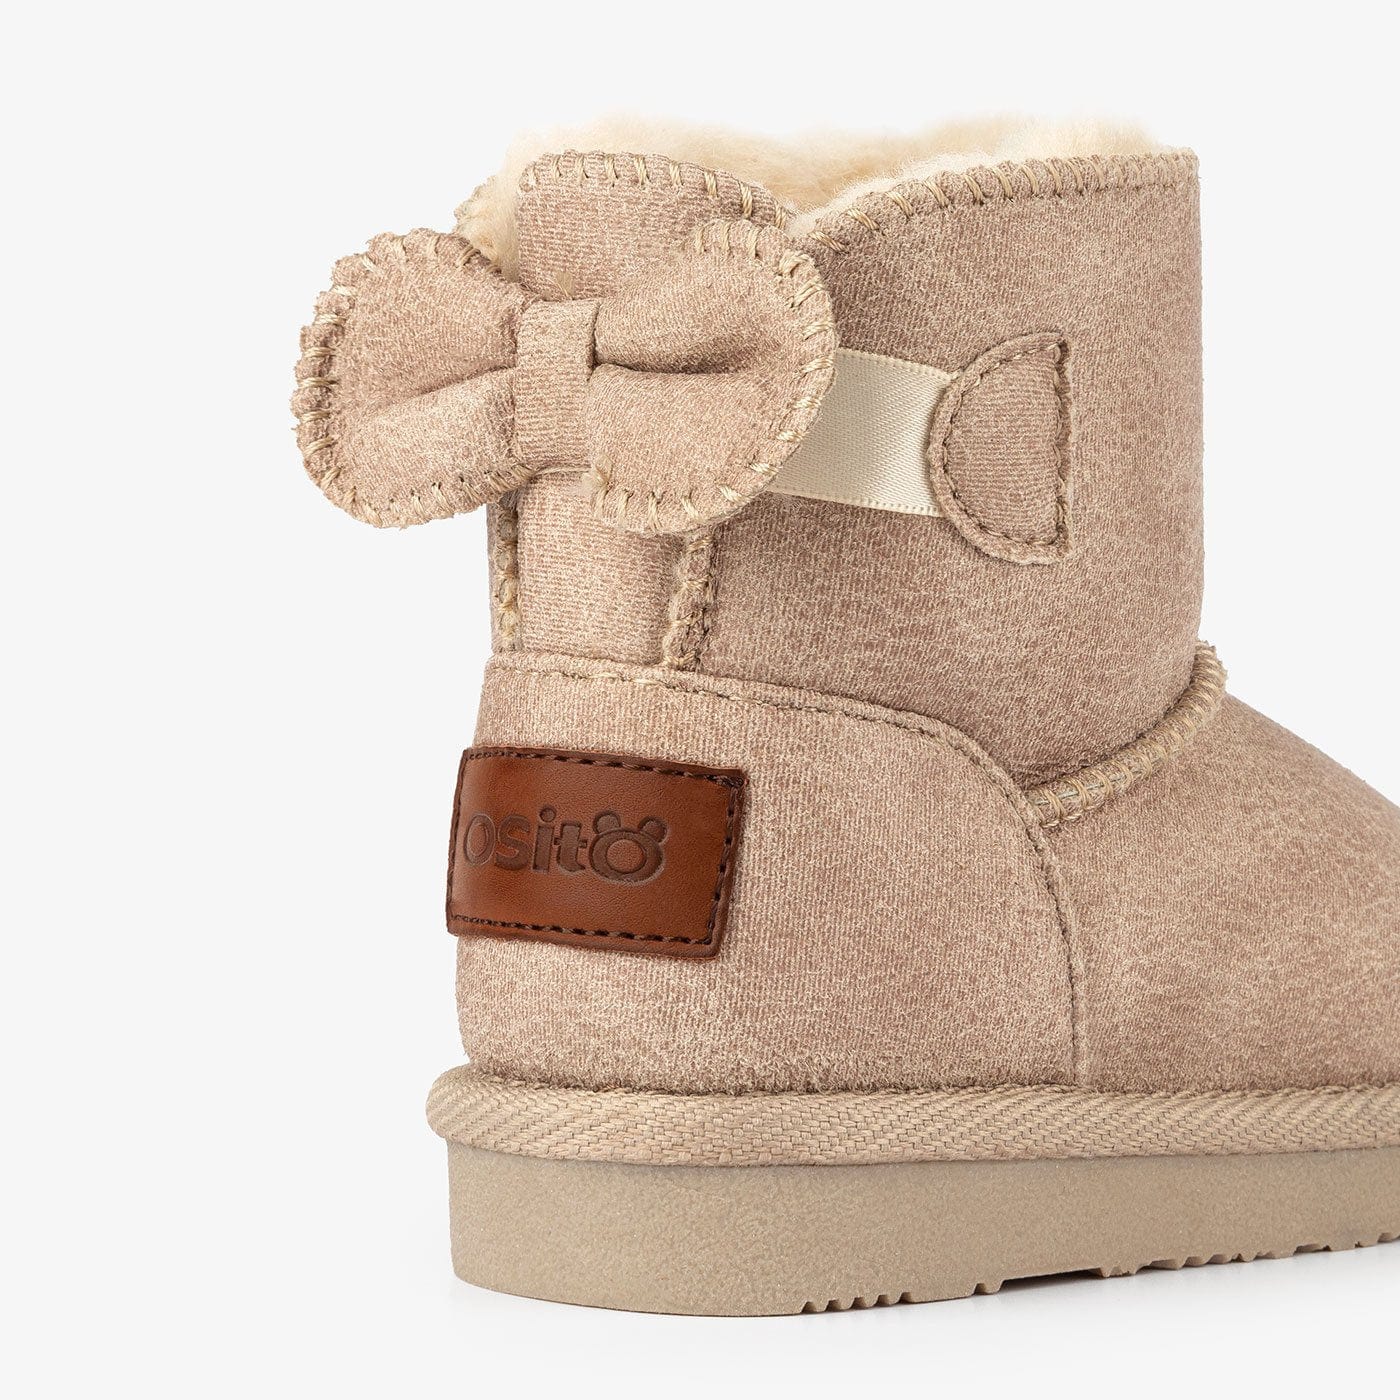 OSITO Shoes Baby's Beige Bow Australian Boots